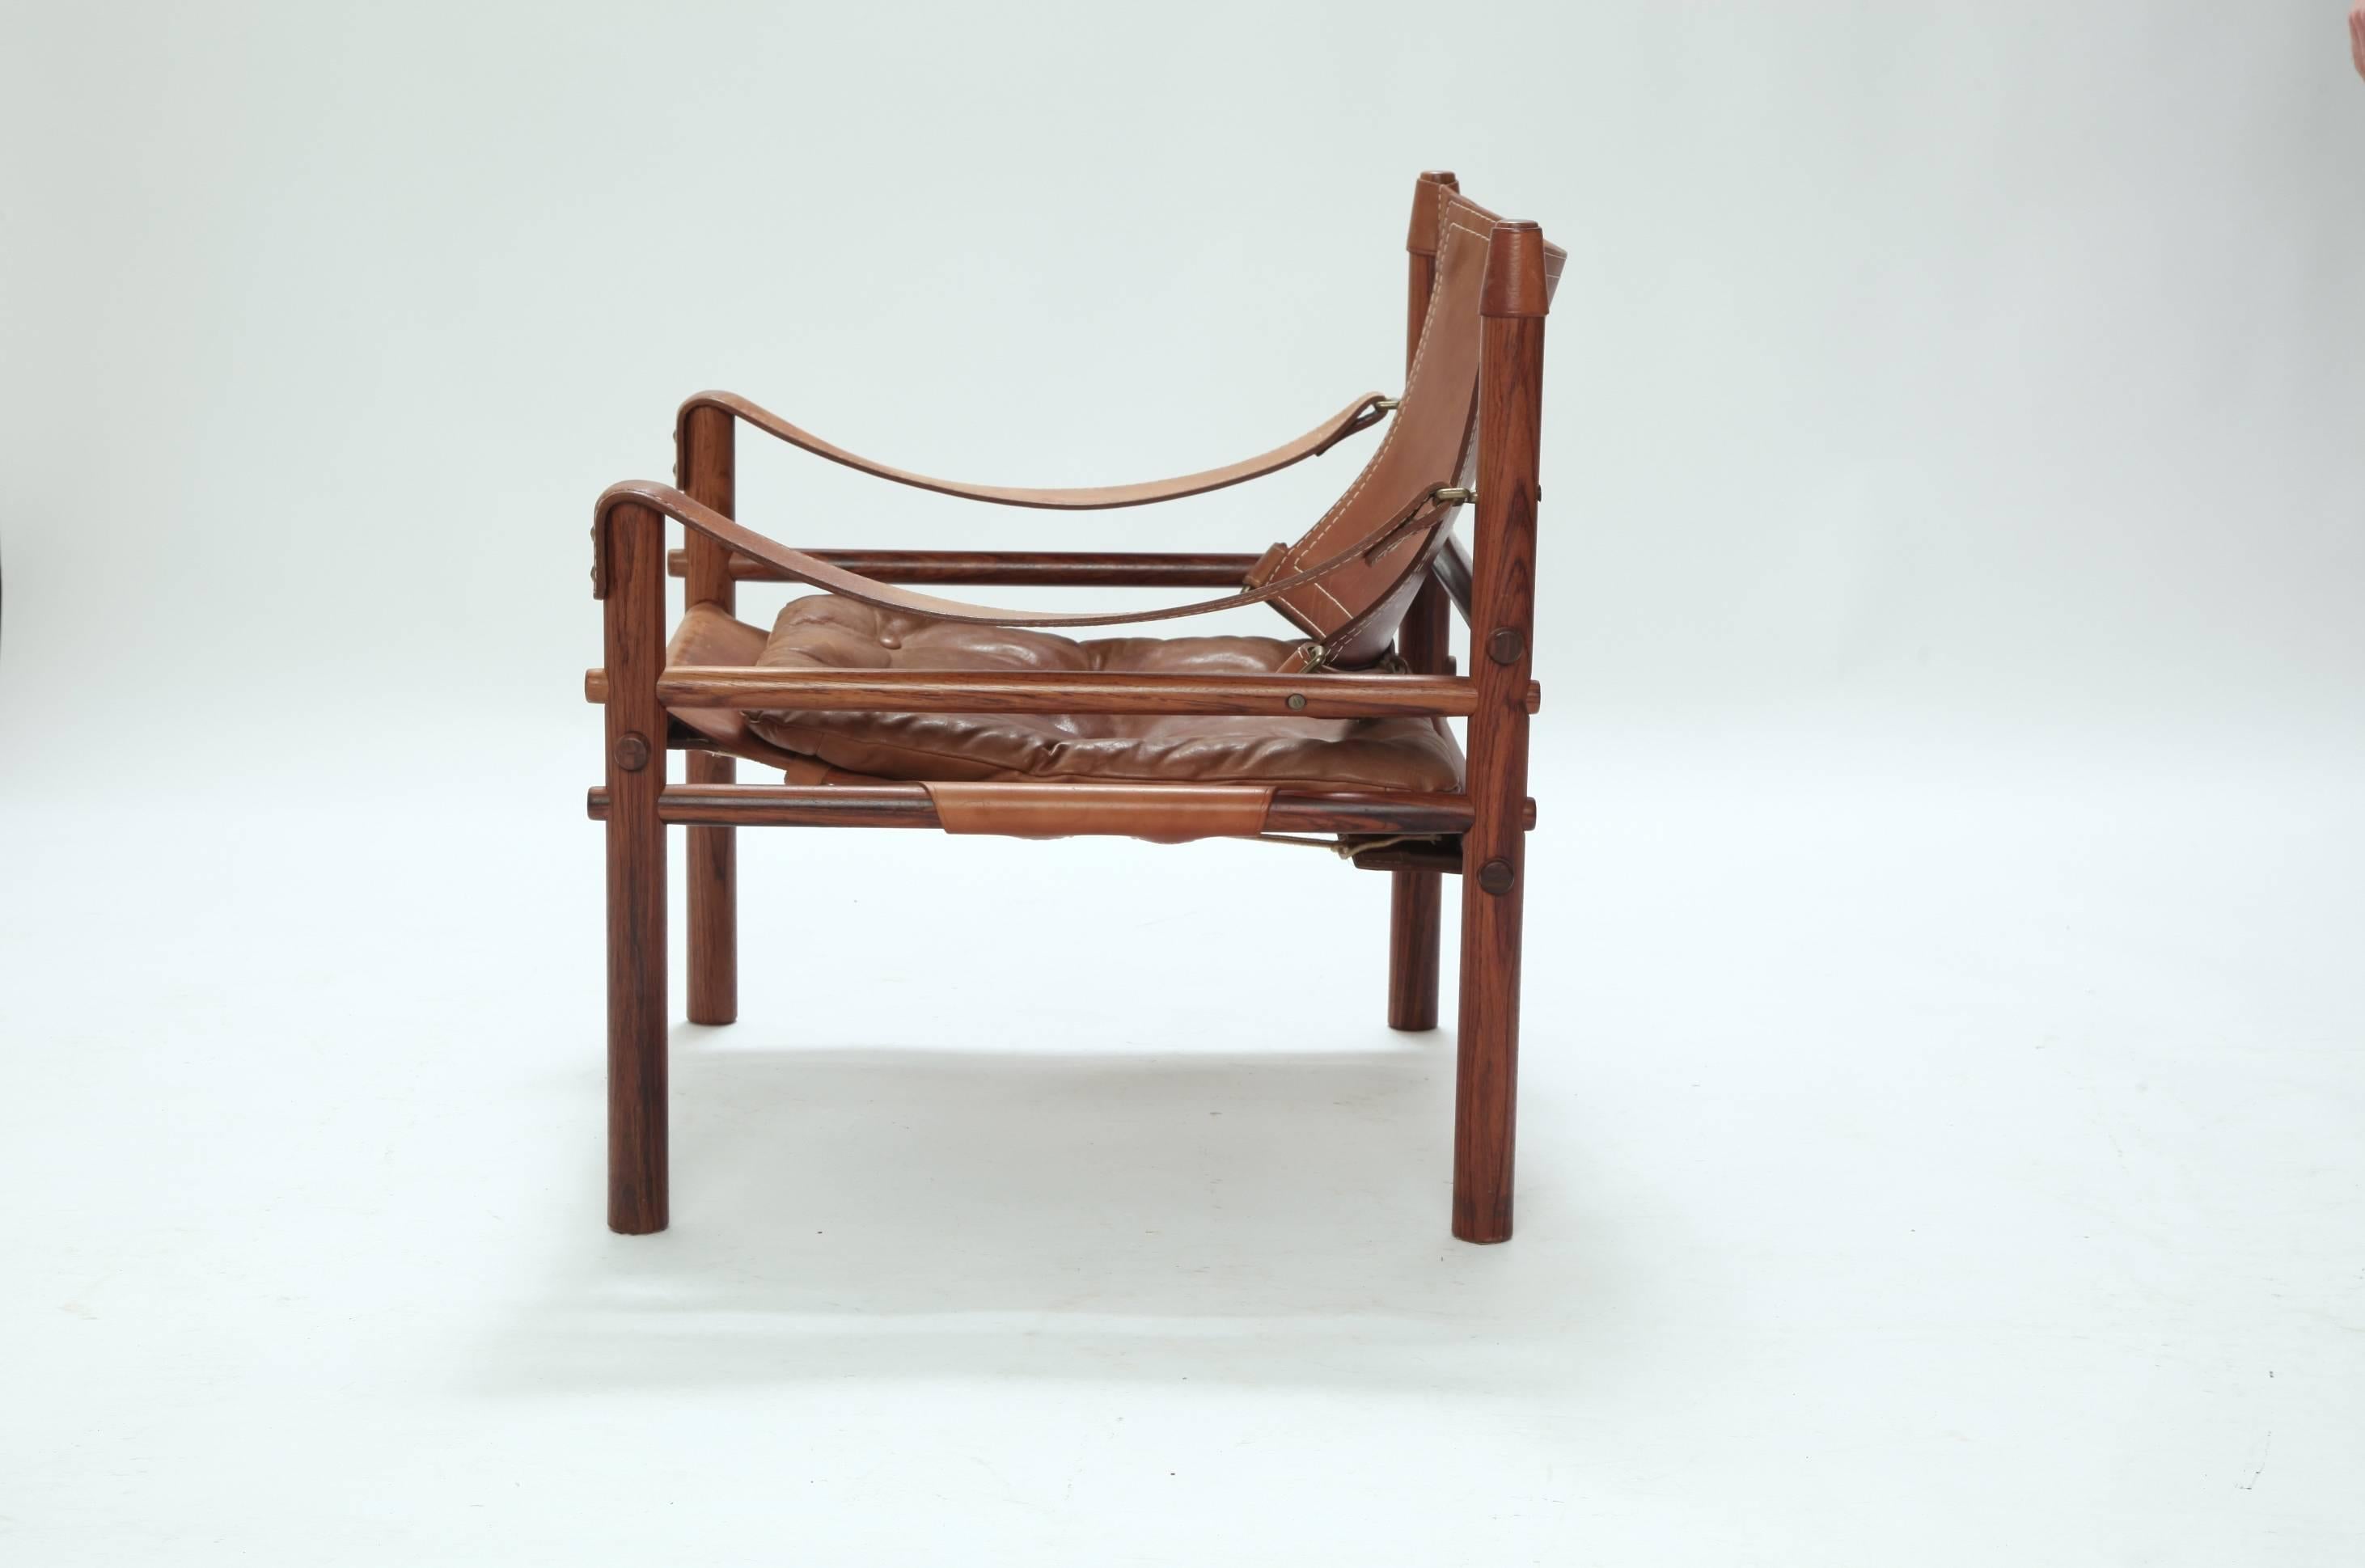 20th Century Arne Norell Rosewood Safair Sirocco Chair, Sweden, 1960s